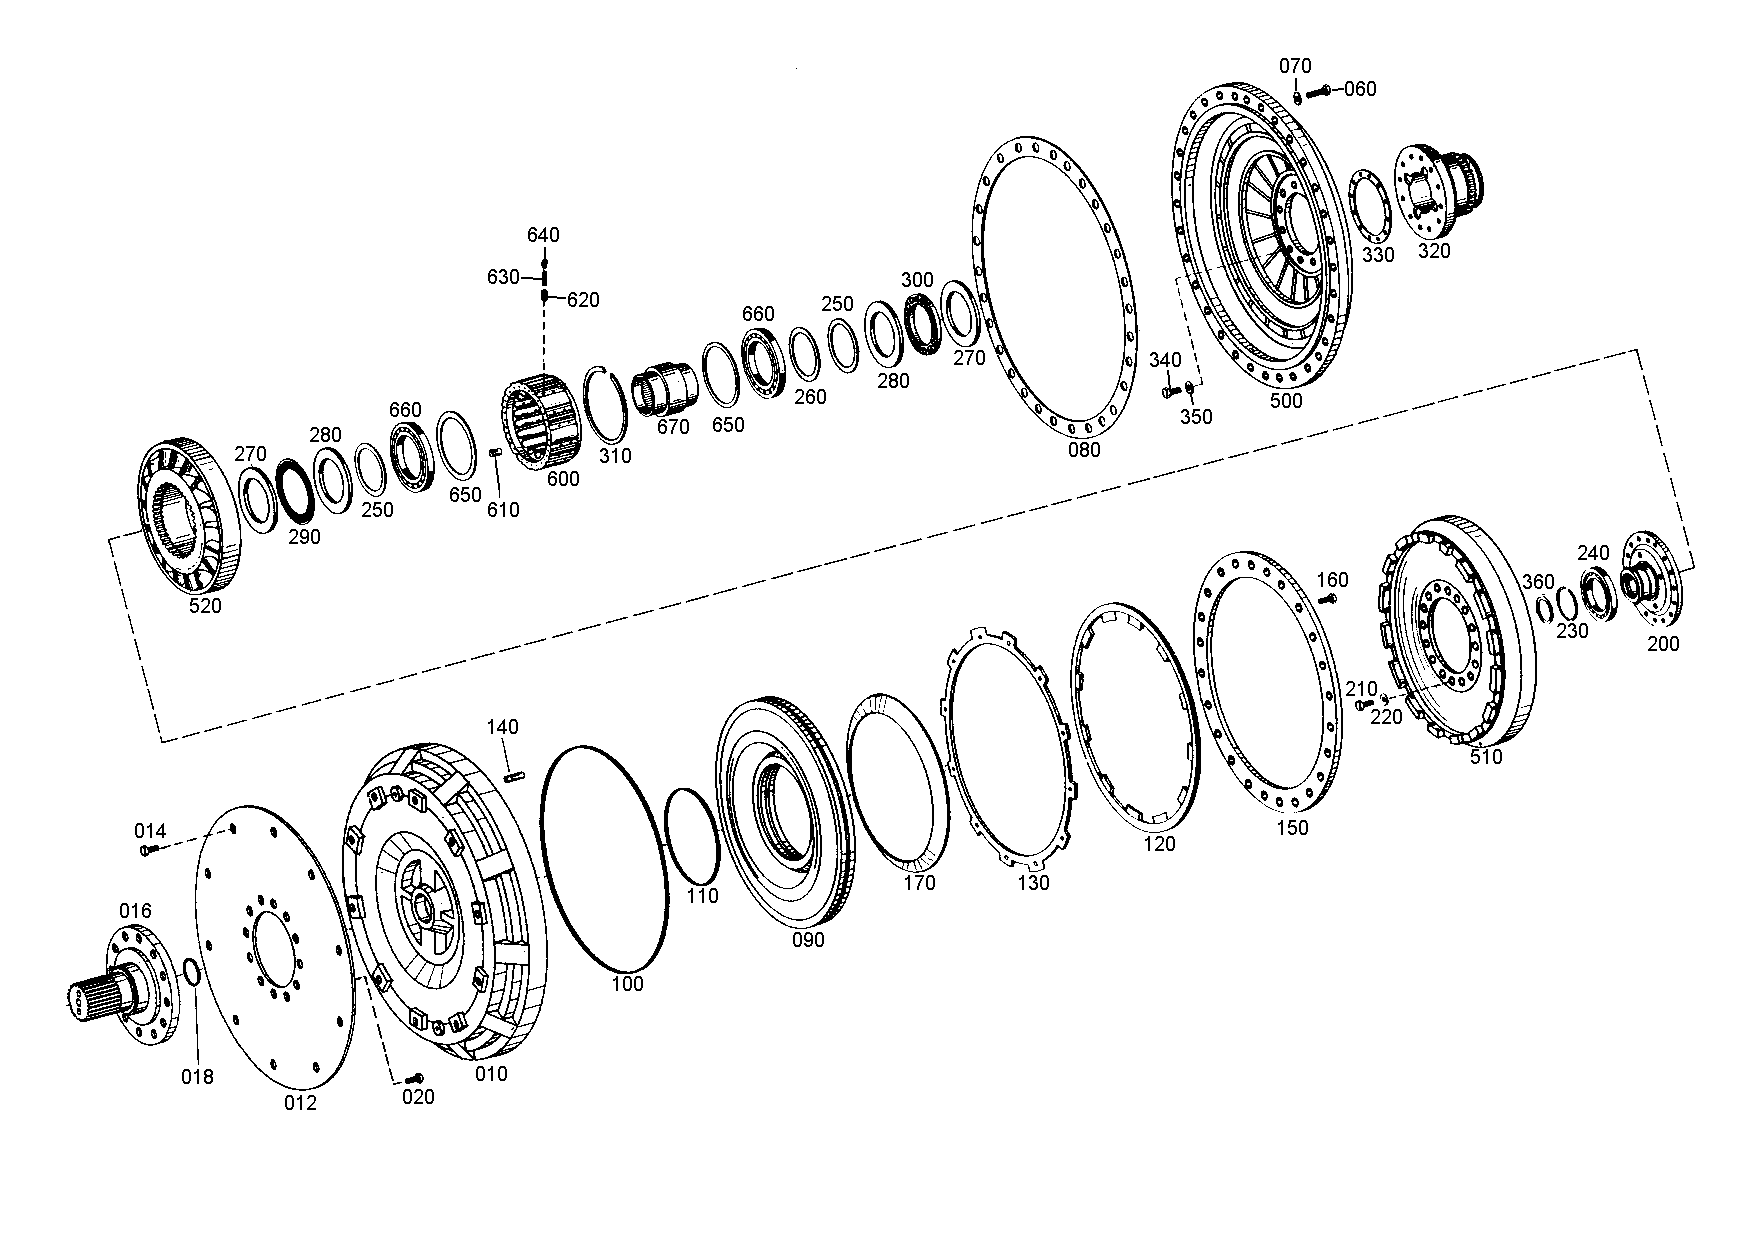 drawing for MOXY TRUCKS AS 052553 - PUMP FLANGE (figure 2)